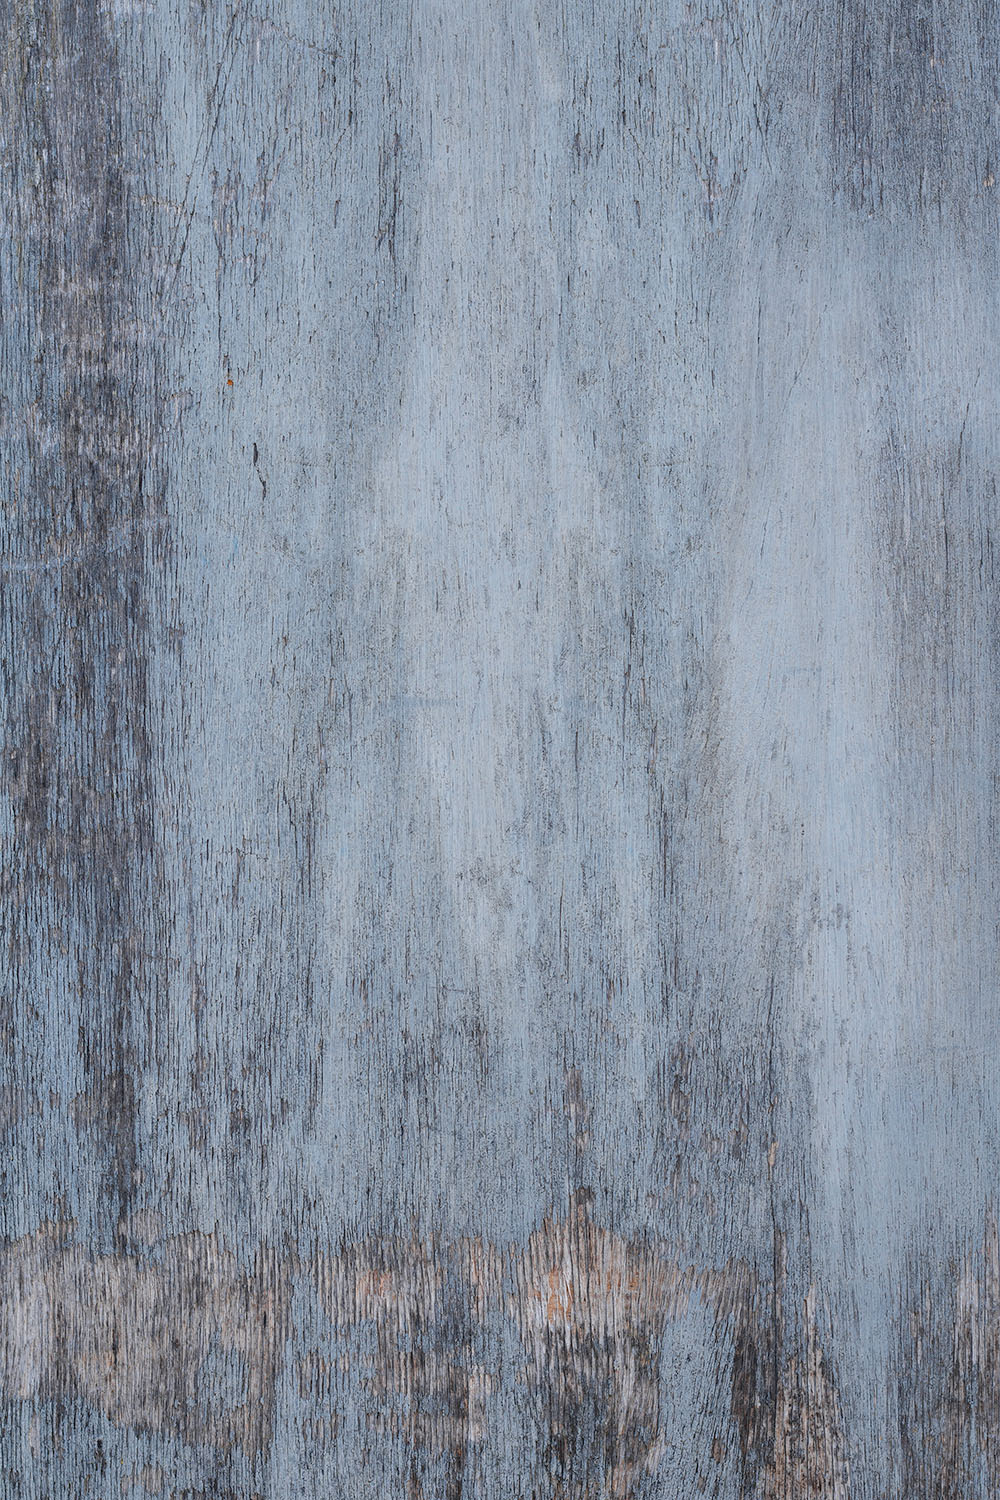 Refined wood is a blue product, food styling backdrop made of vinyl